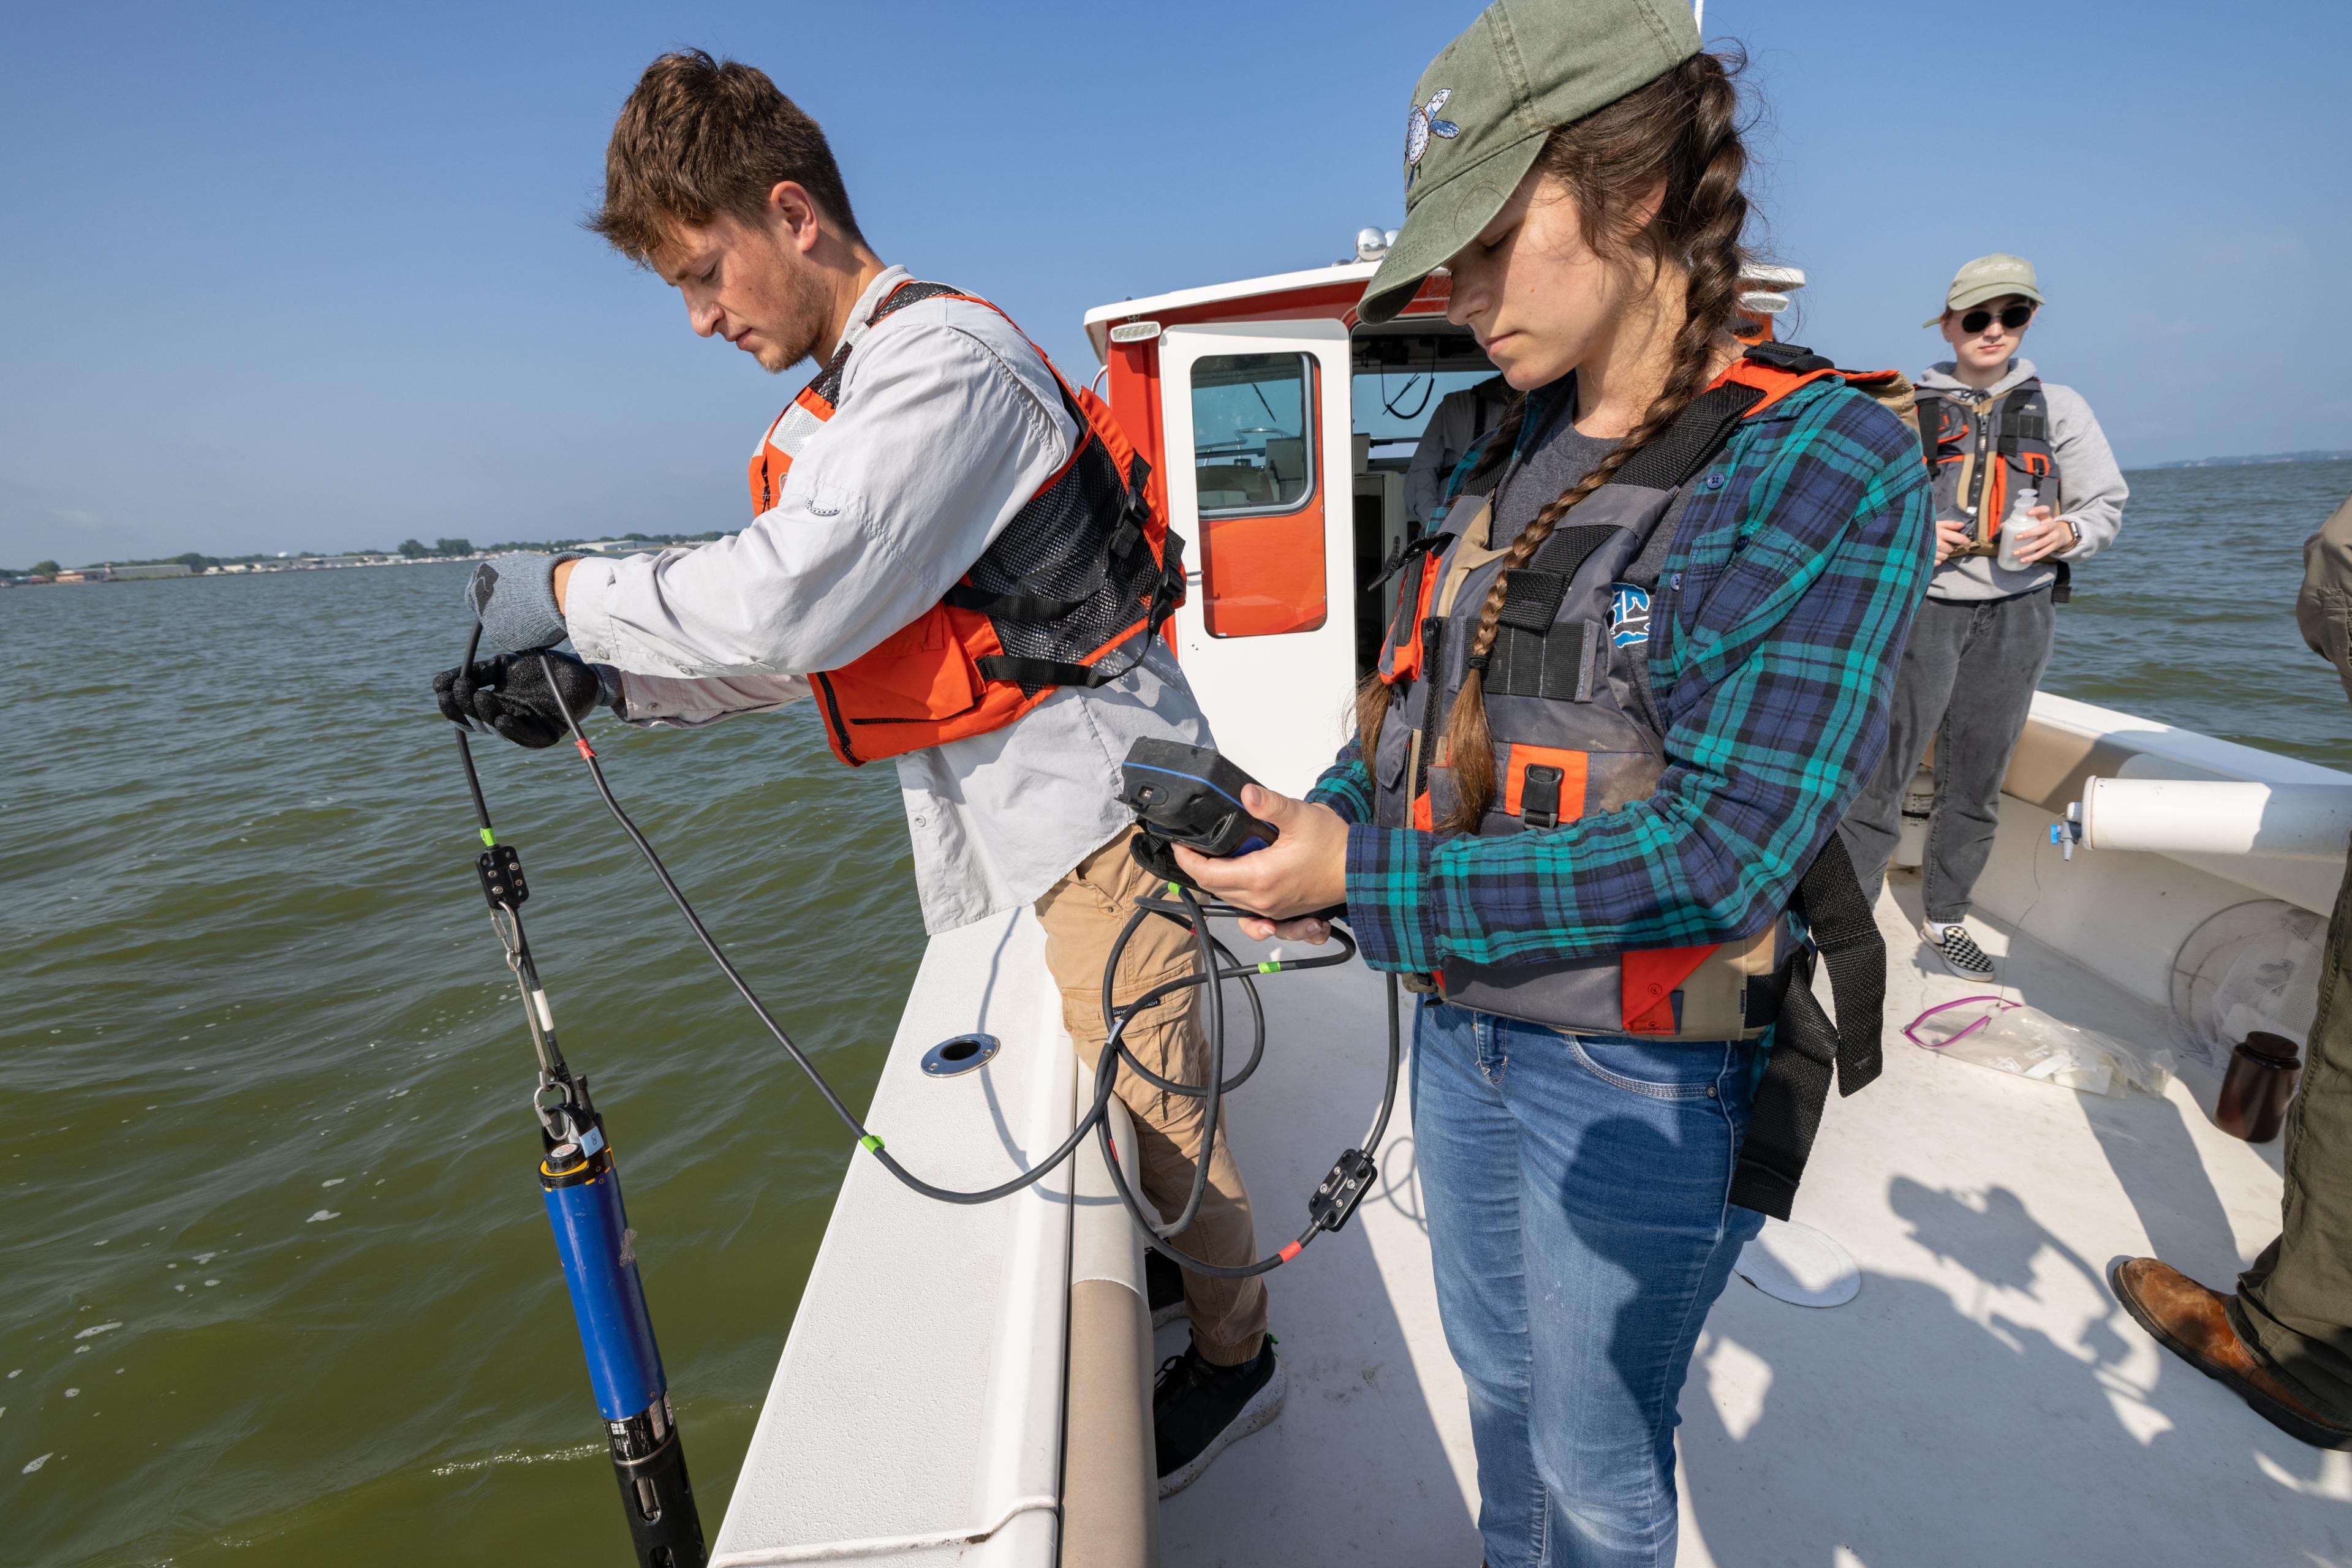 Students collect water samples from Lake Erie aboard the research boat 